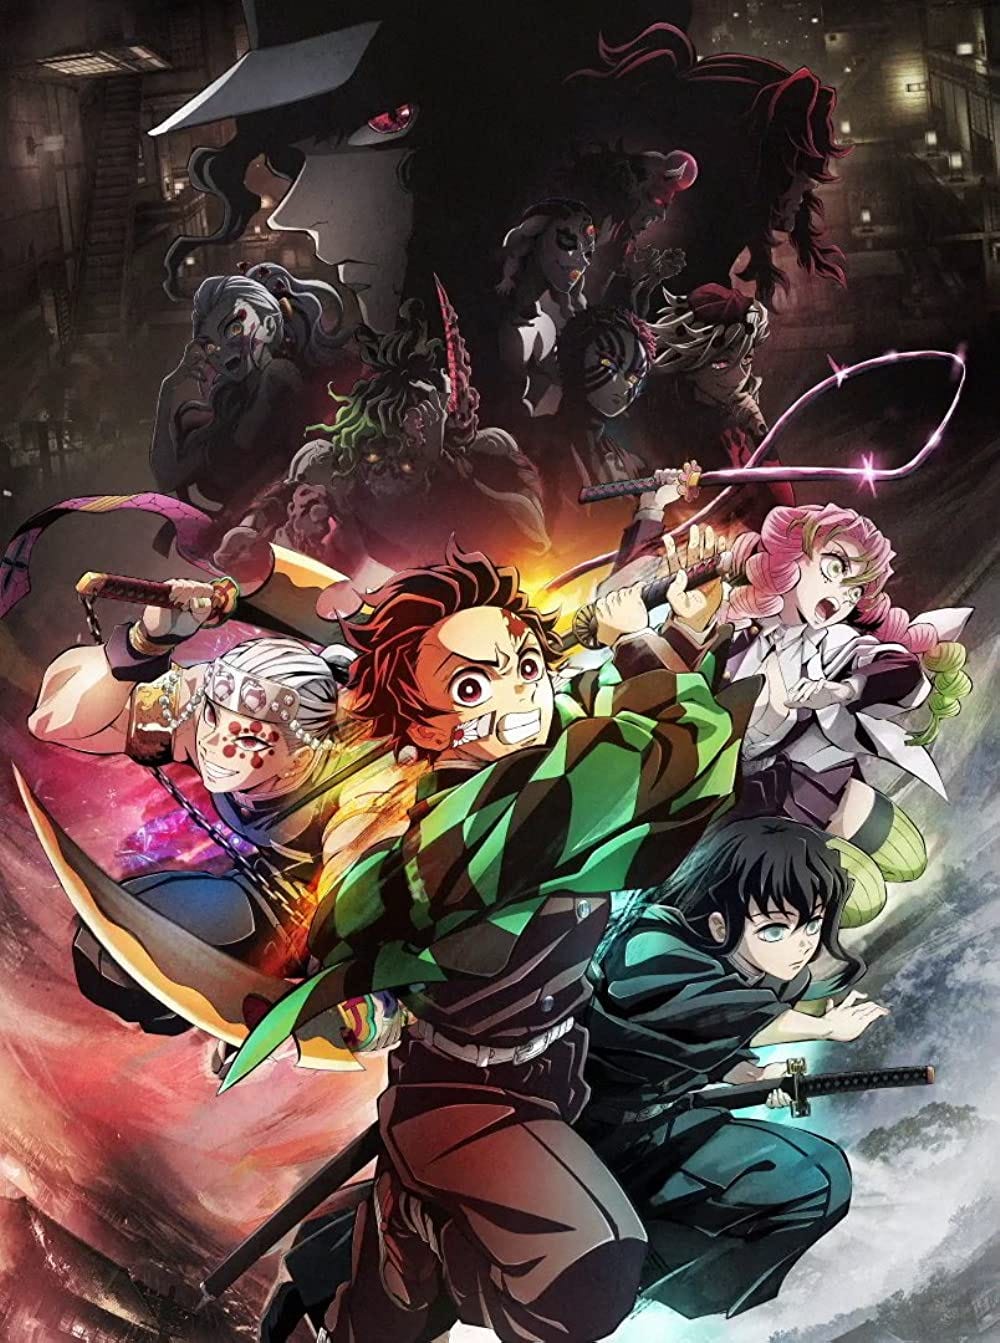 Demon Slayer season 2 announced; to premiere later this year- Cinema express